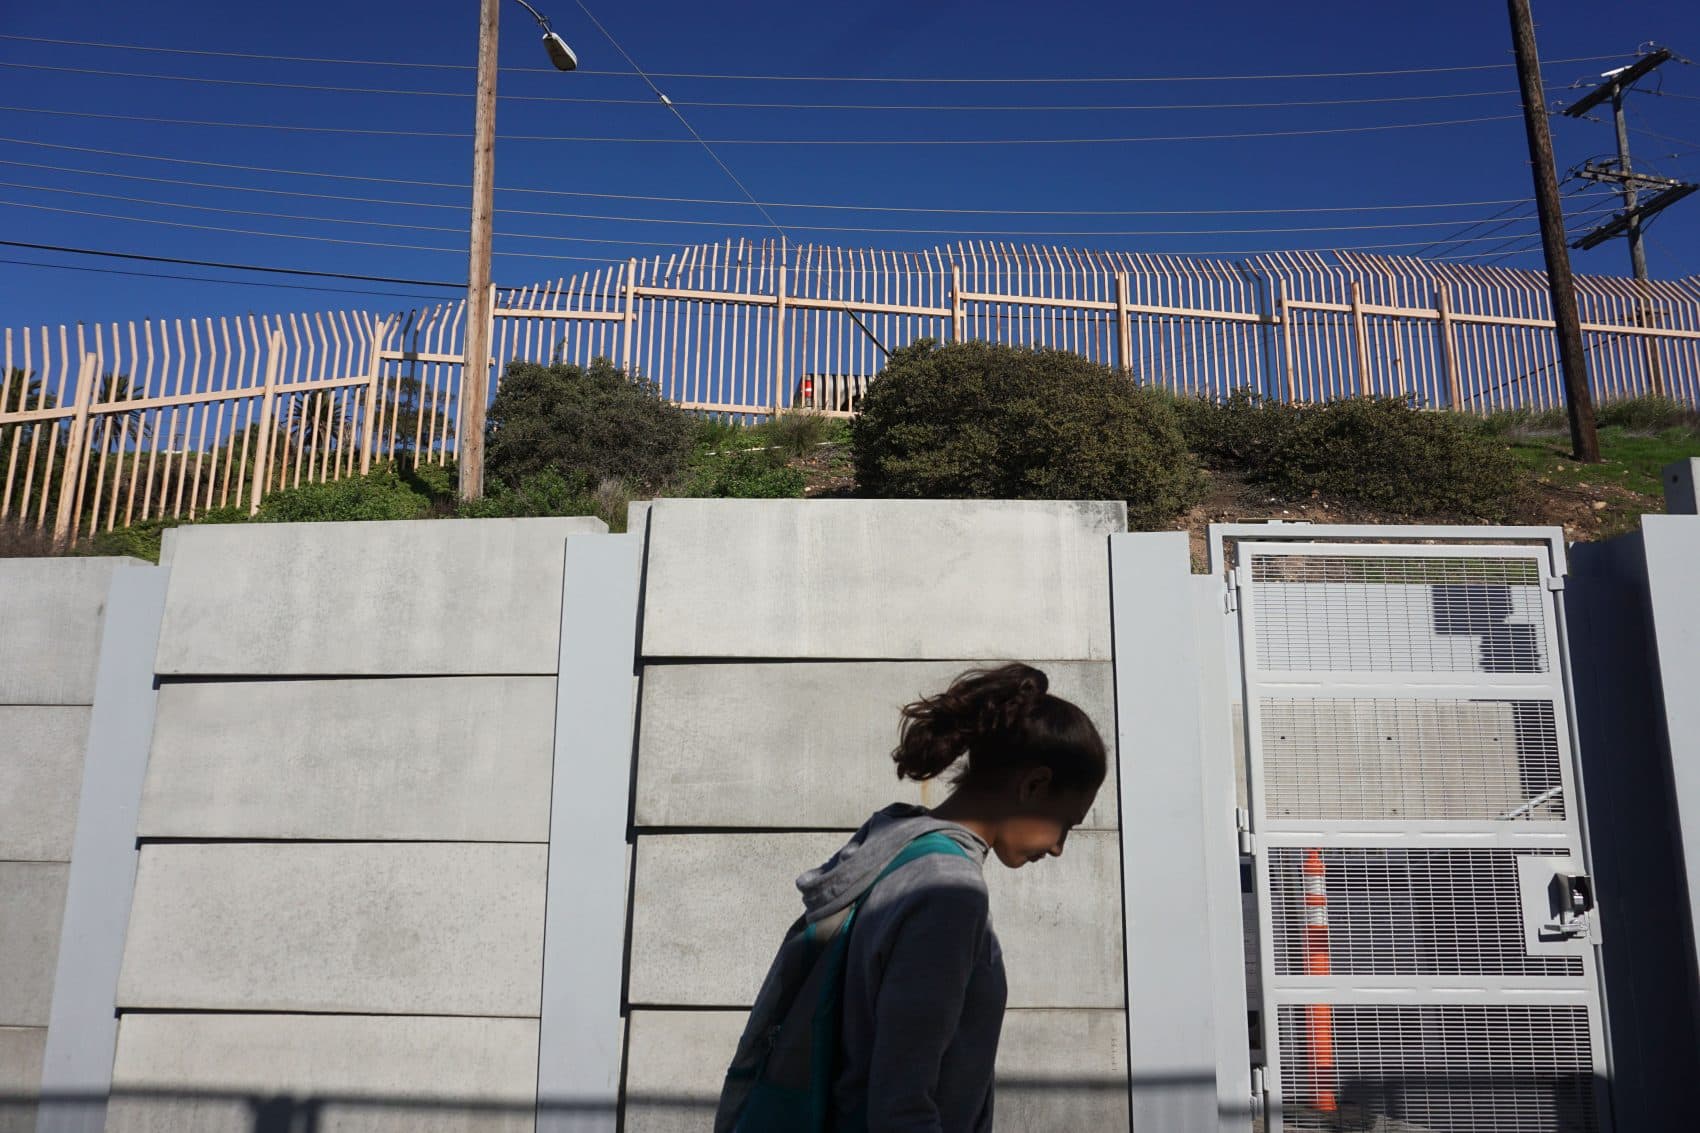 A view of the U.S.-Mexico border wall on Jan. 25, 2017 in San Ysidro, Calif. (Sandy Huffaker/Getty Images)